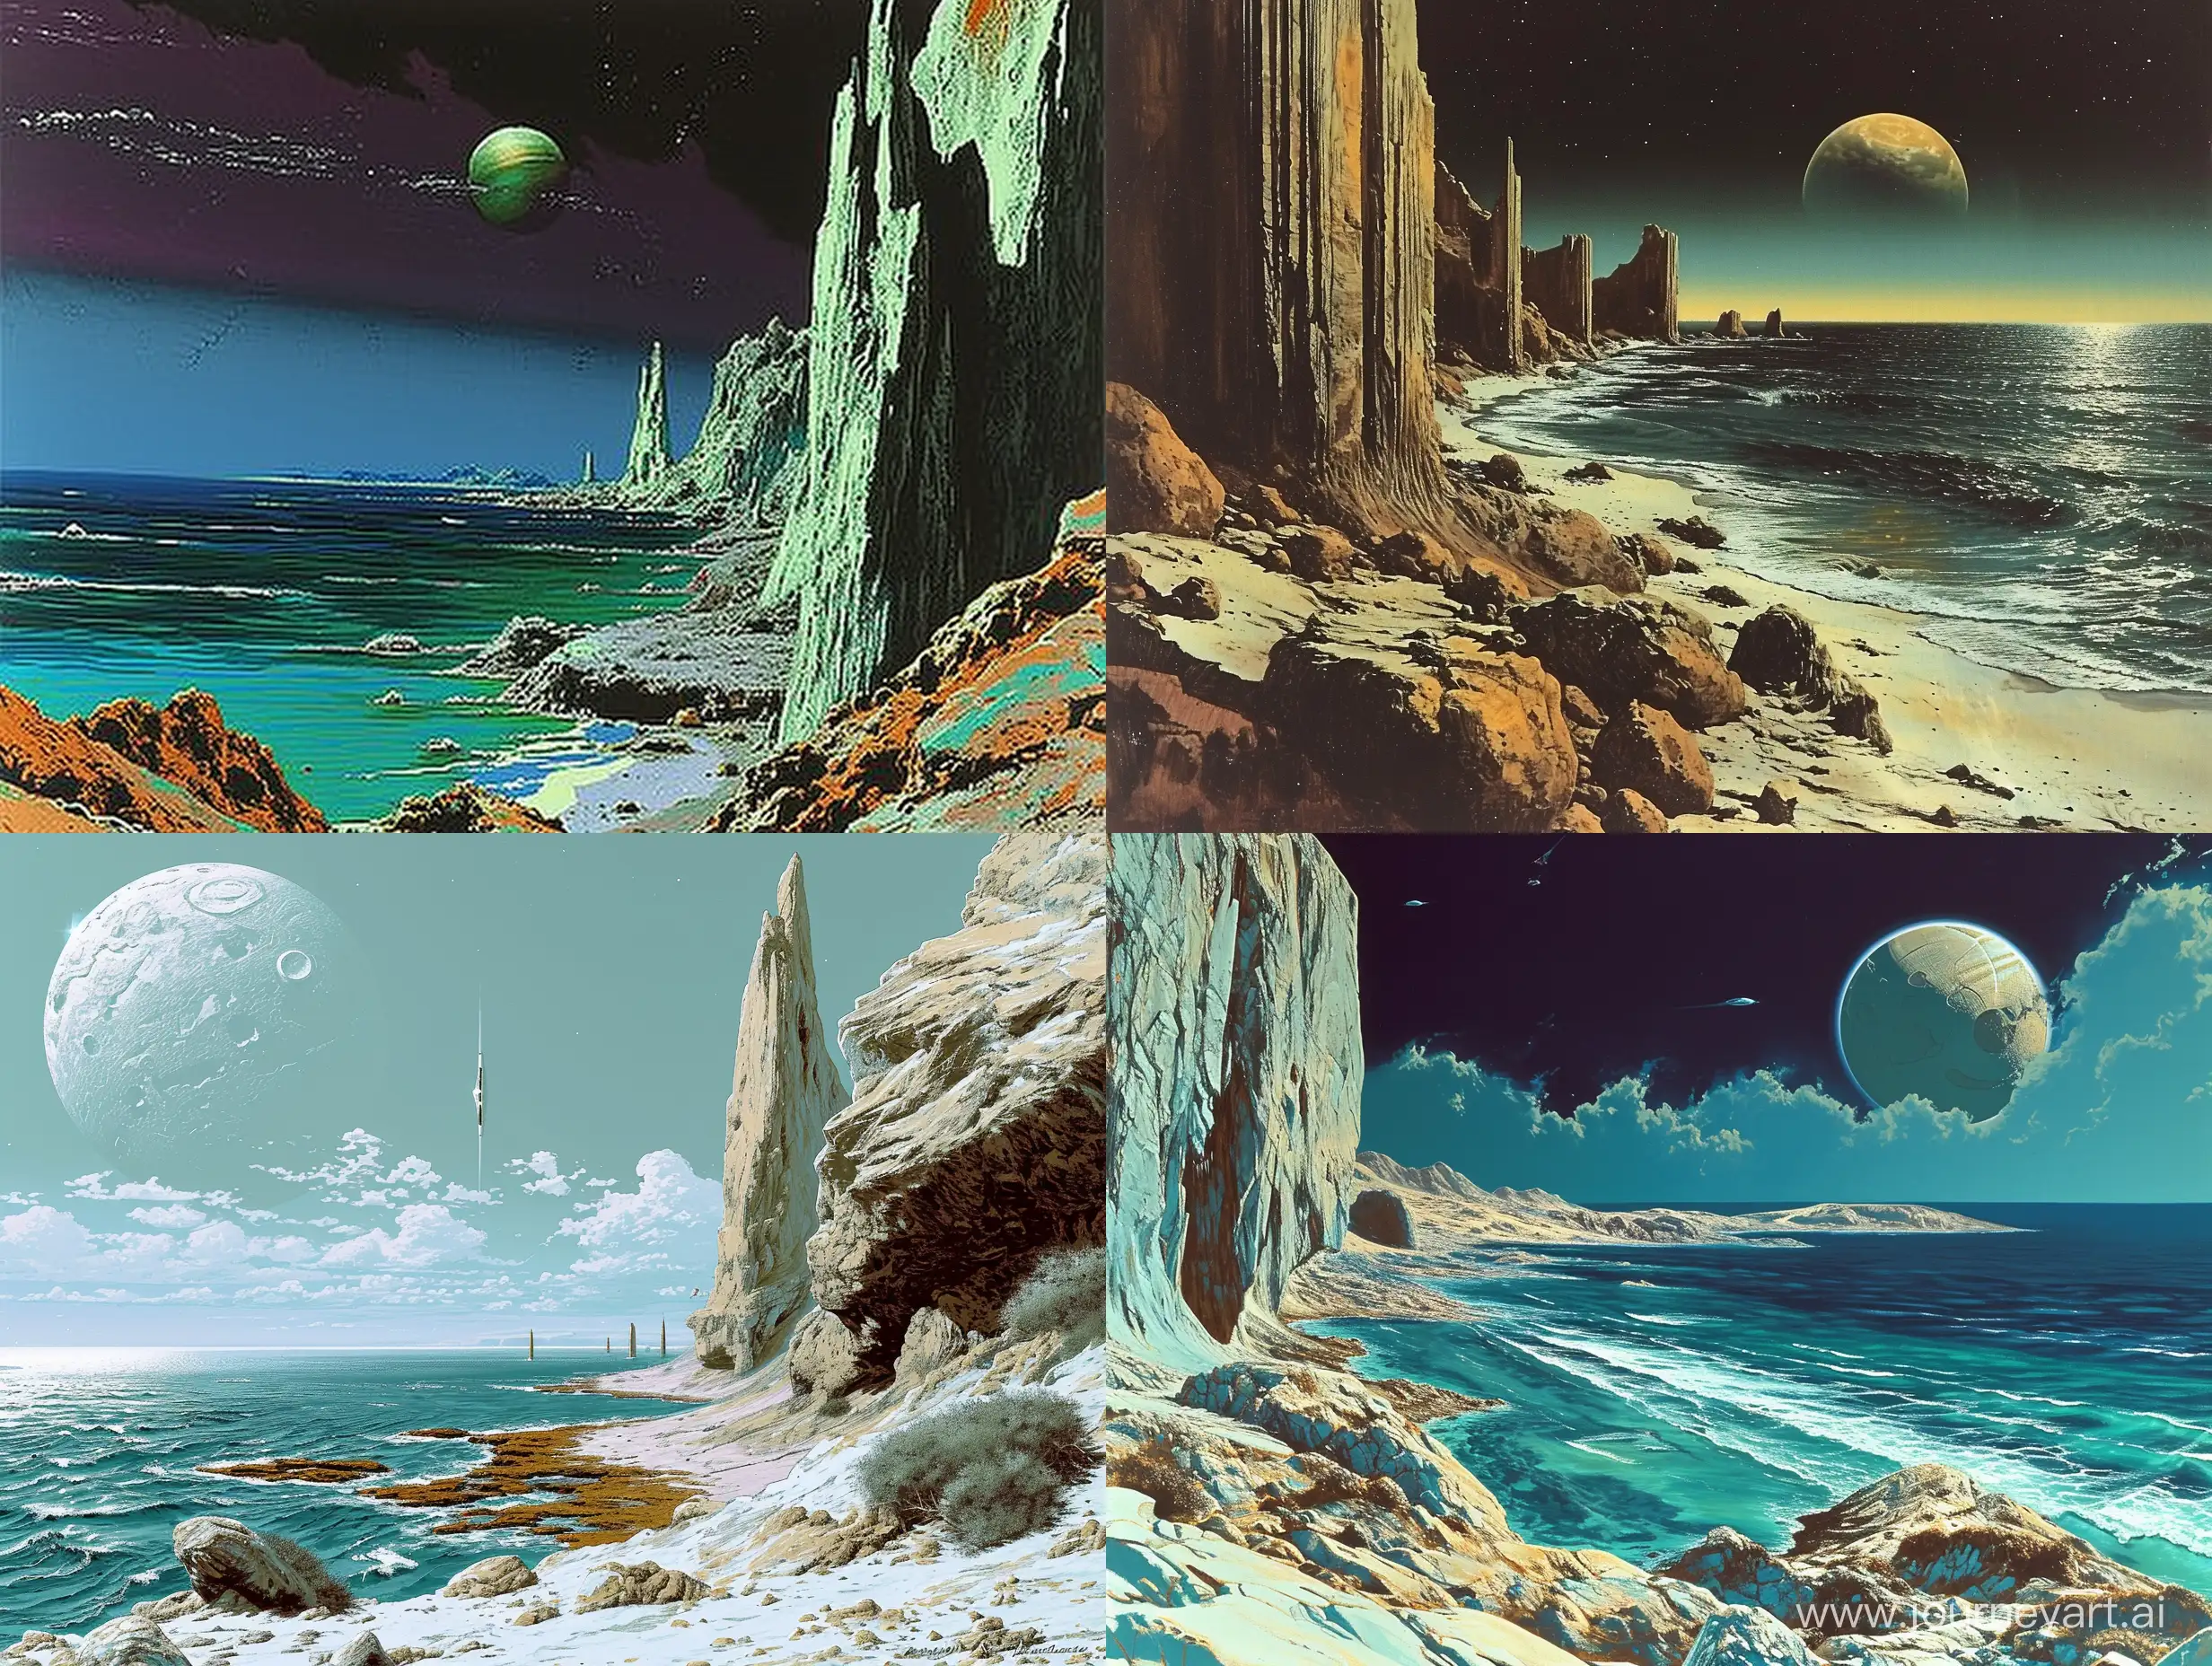 An alien landscape of the coast of an ocean. In the style of Roger Dean and Ralph McQuarrie. retro science fiction art style. in color. surreal. 